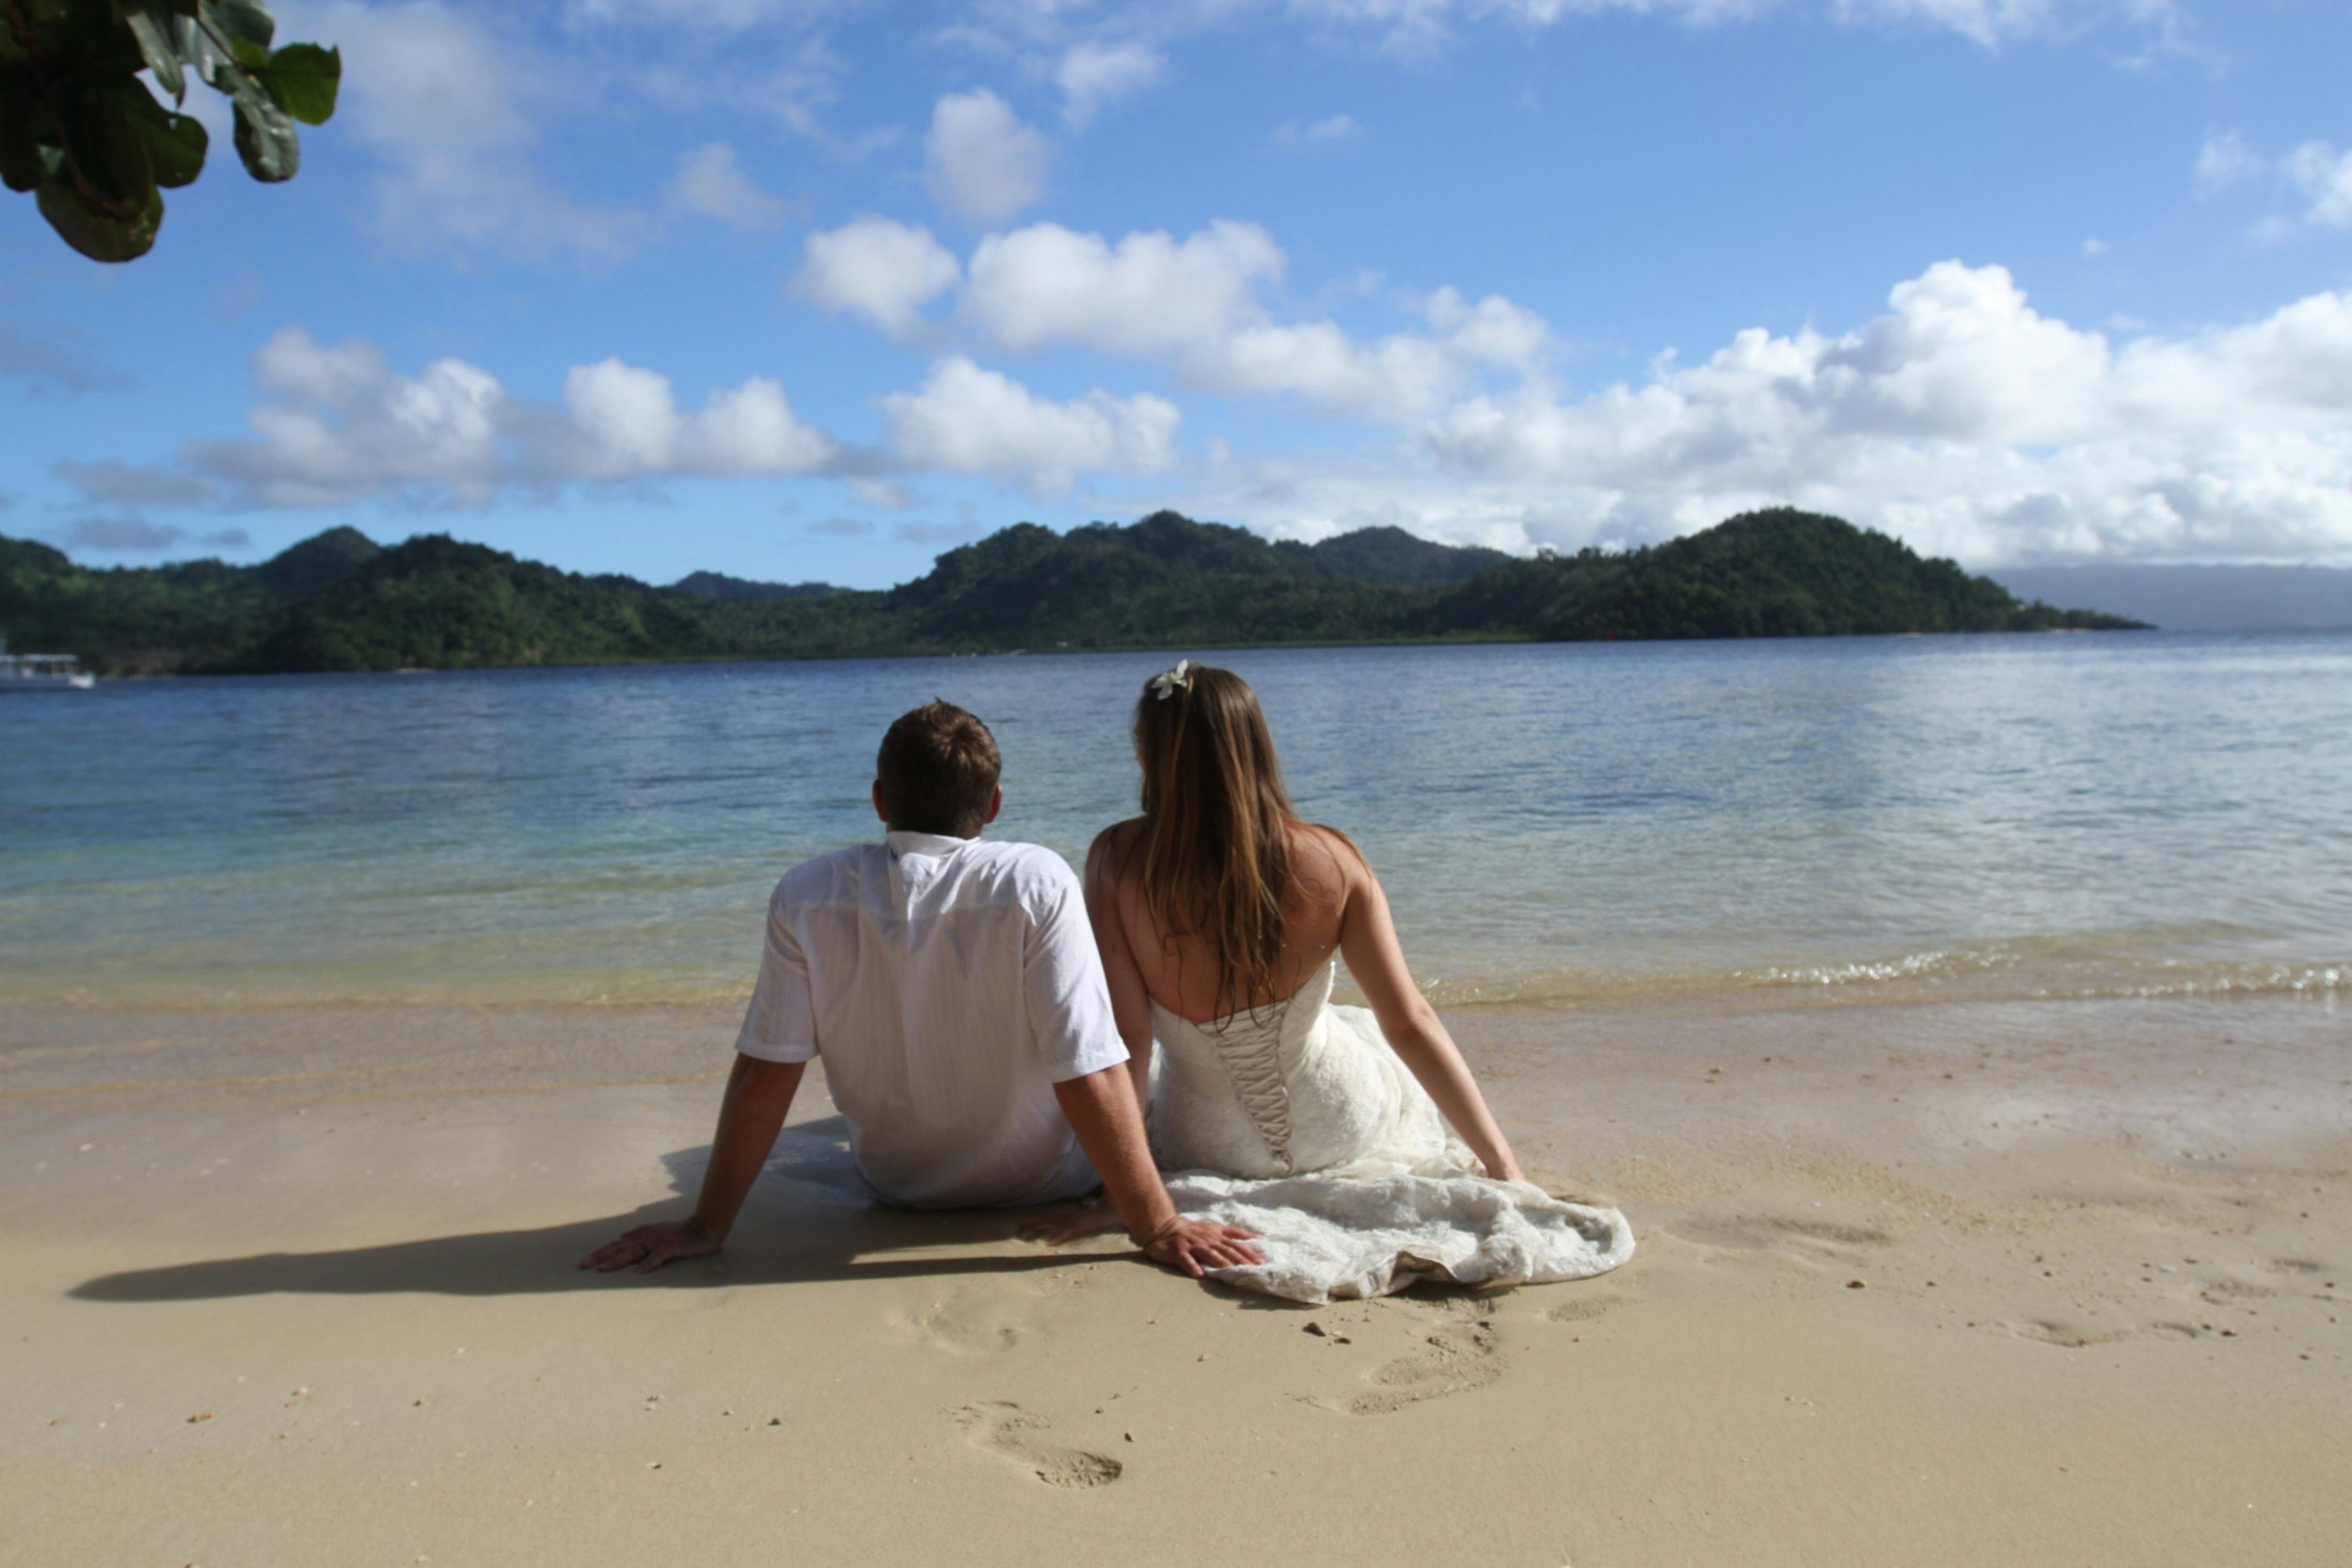 A young newlywed couple sitting on the sand looking at the ocean.